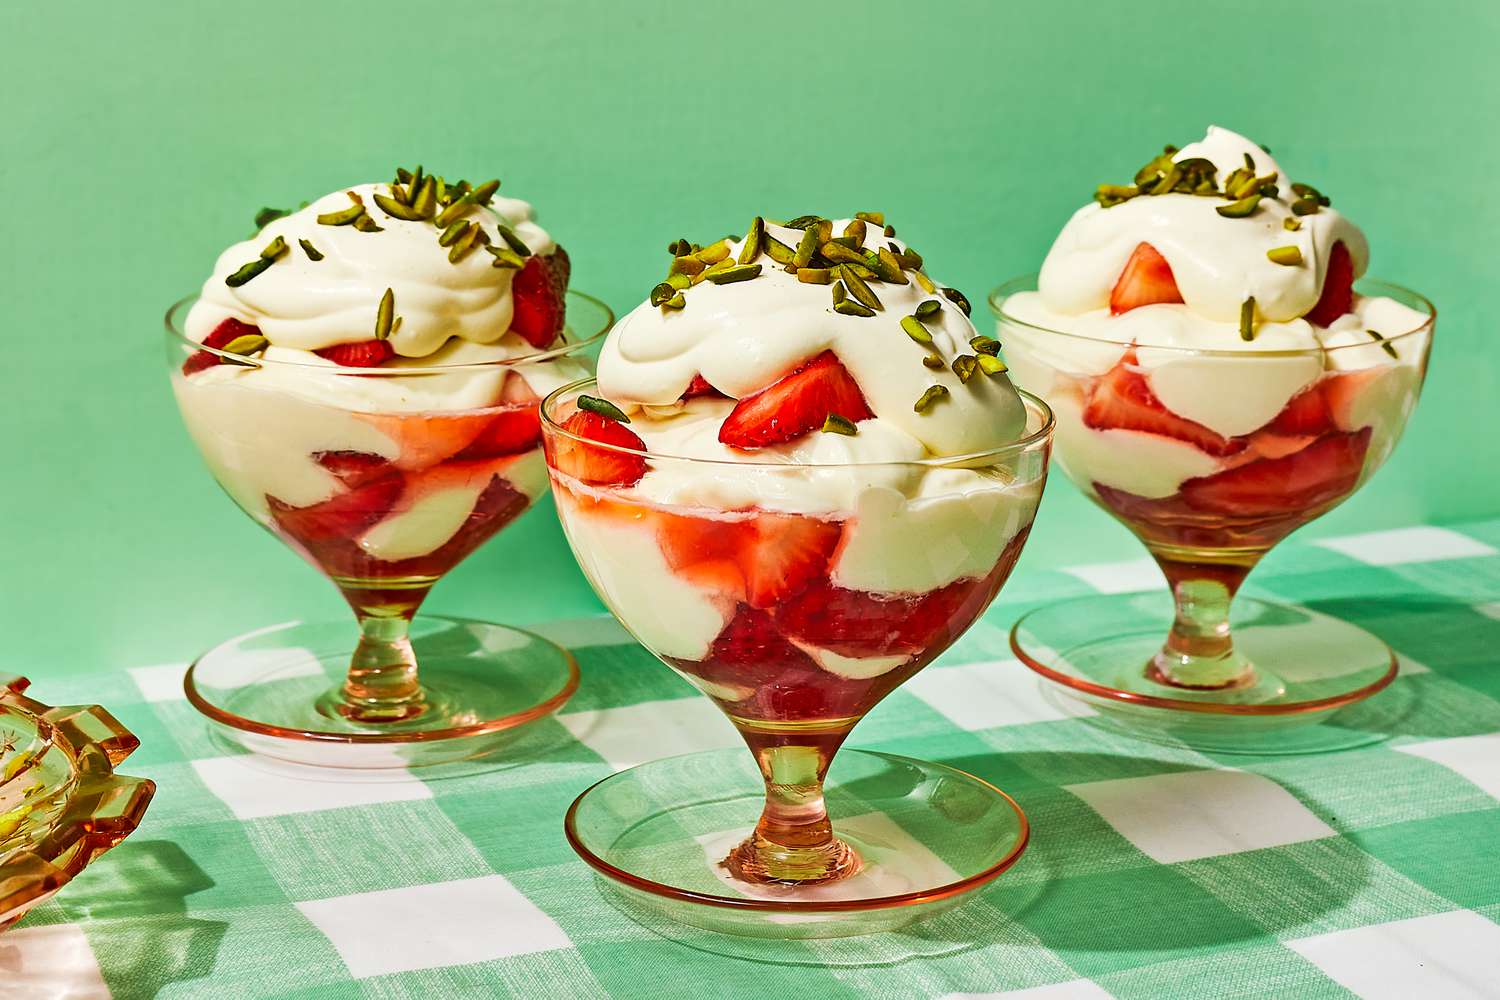 Fresas con crema topped with whipped cream and nuts